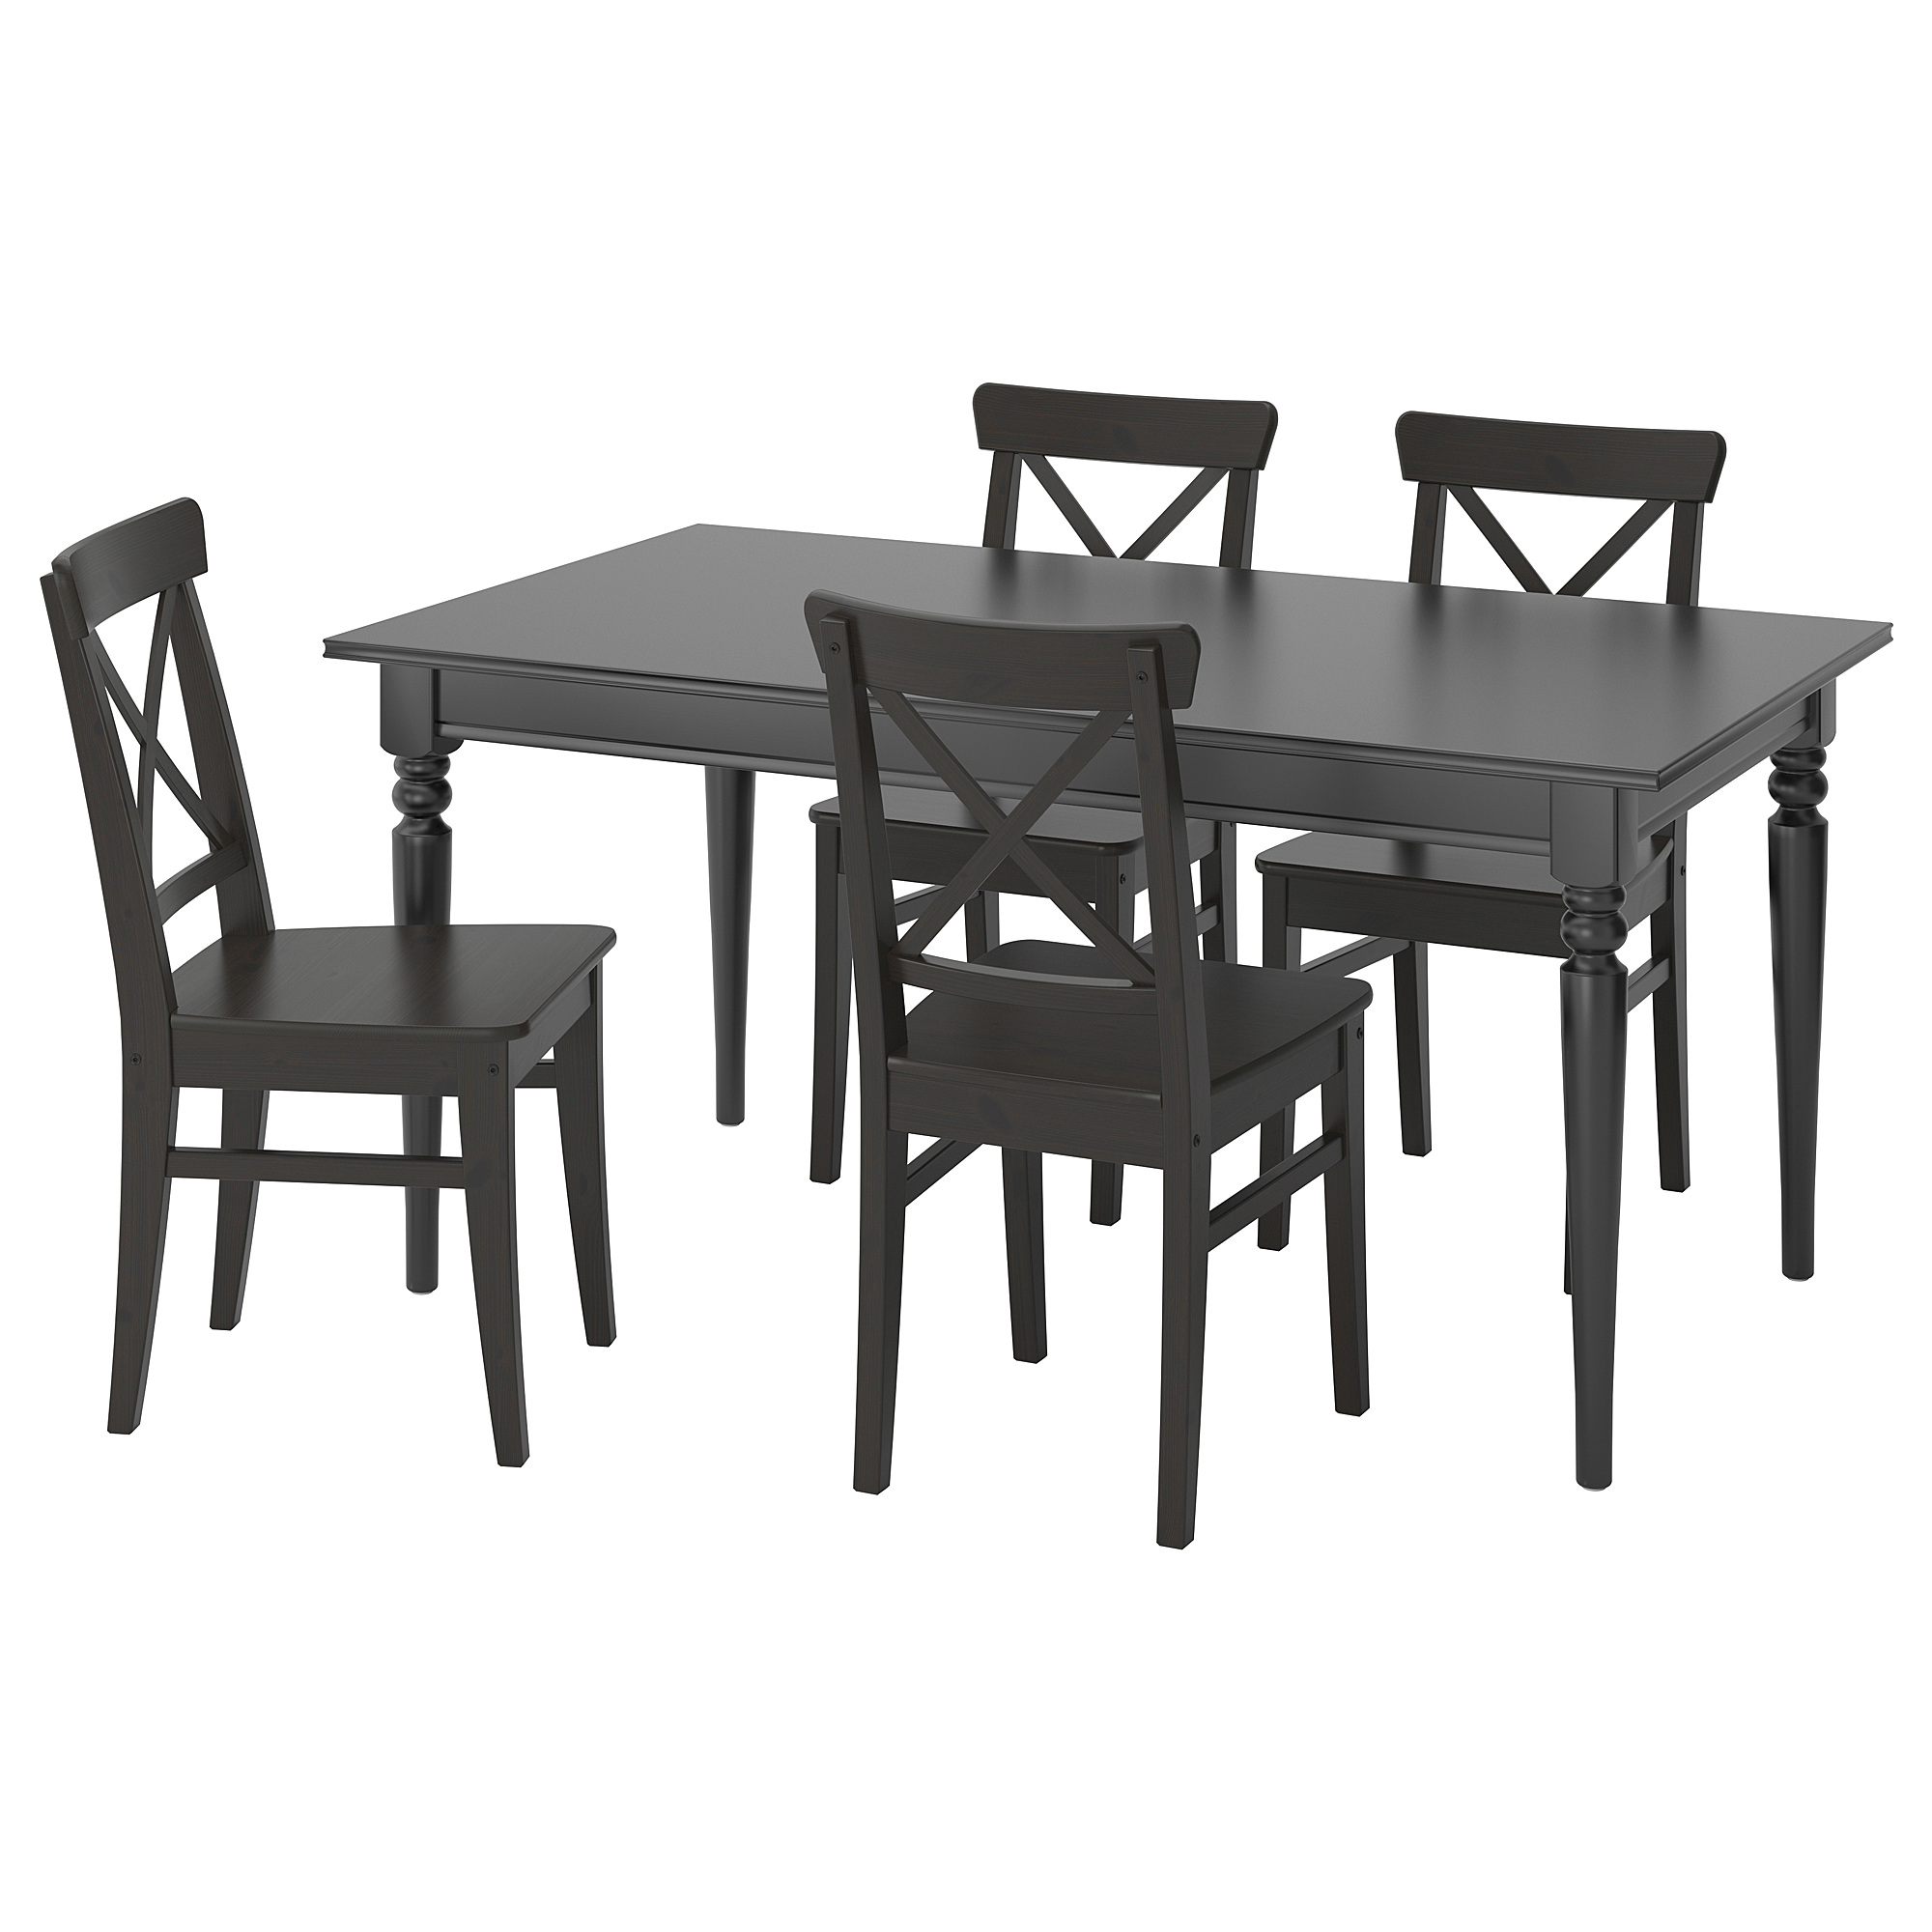 INGATORP/INGOLF table and 4 chairs